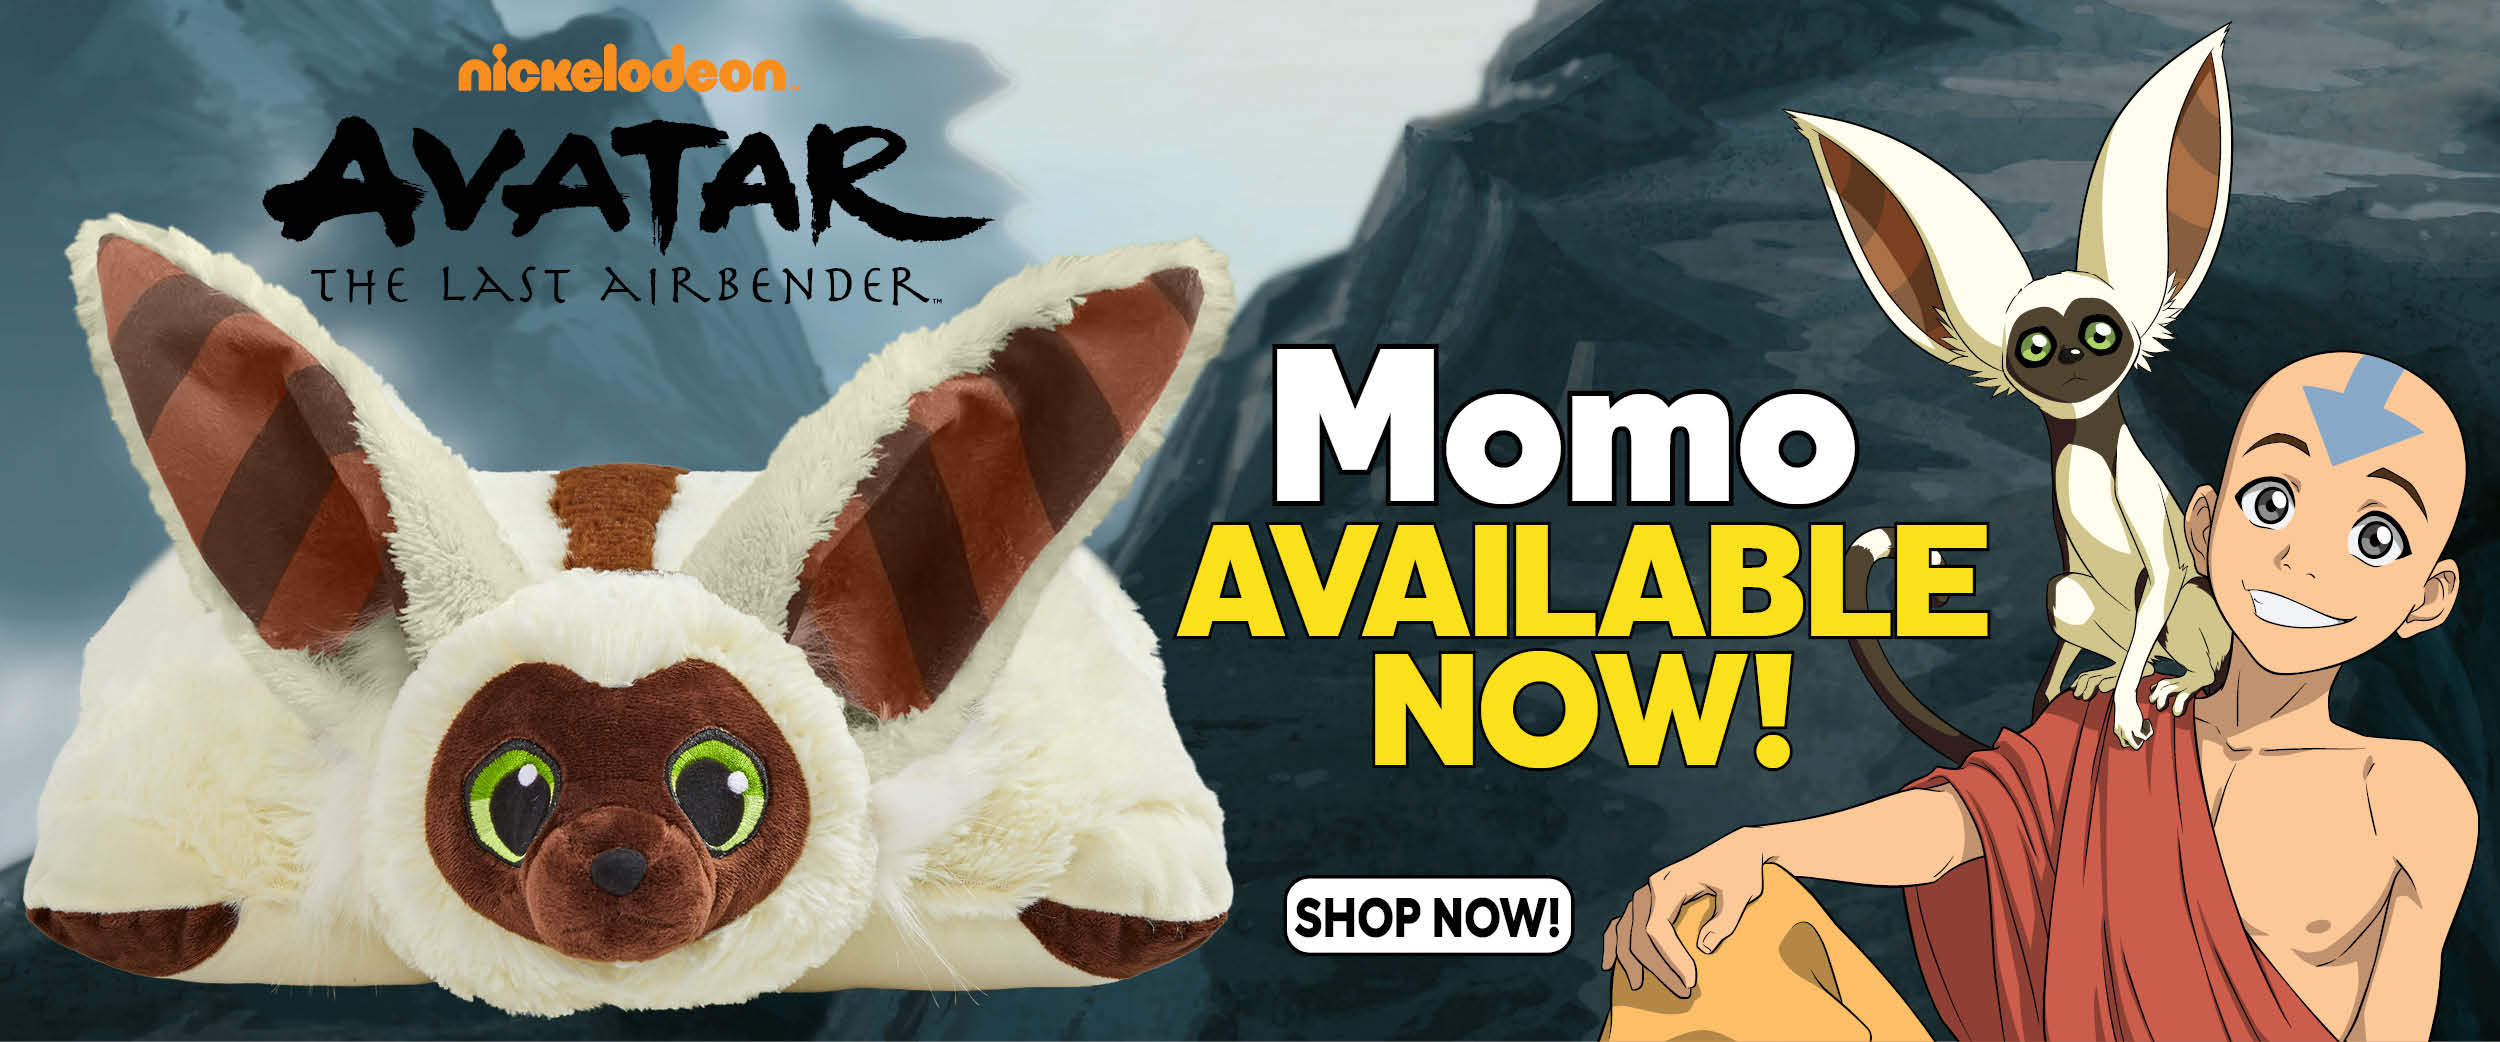 Momo Pillow Pet from Avatar the Last Airbender available now! Shop now!